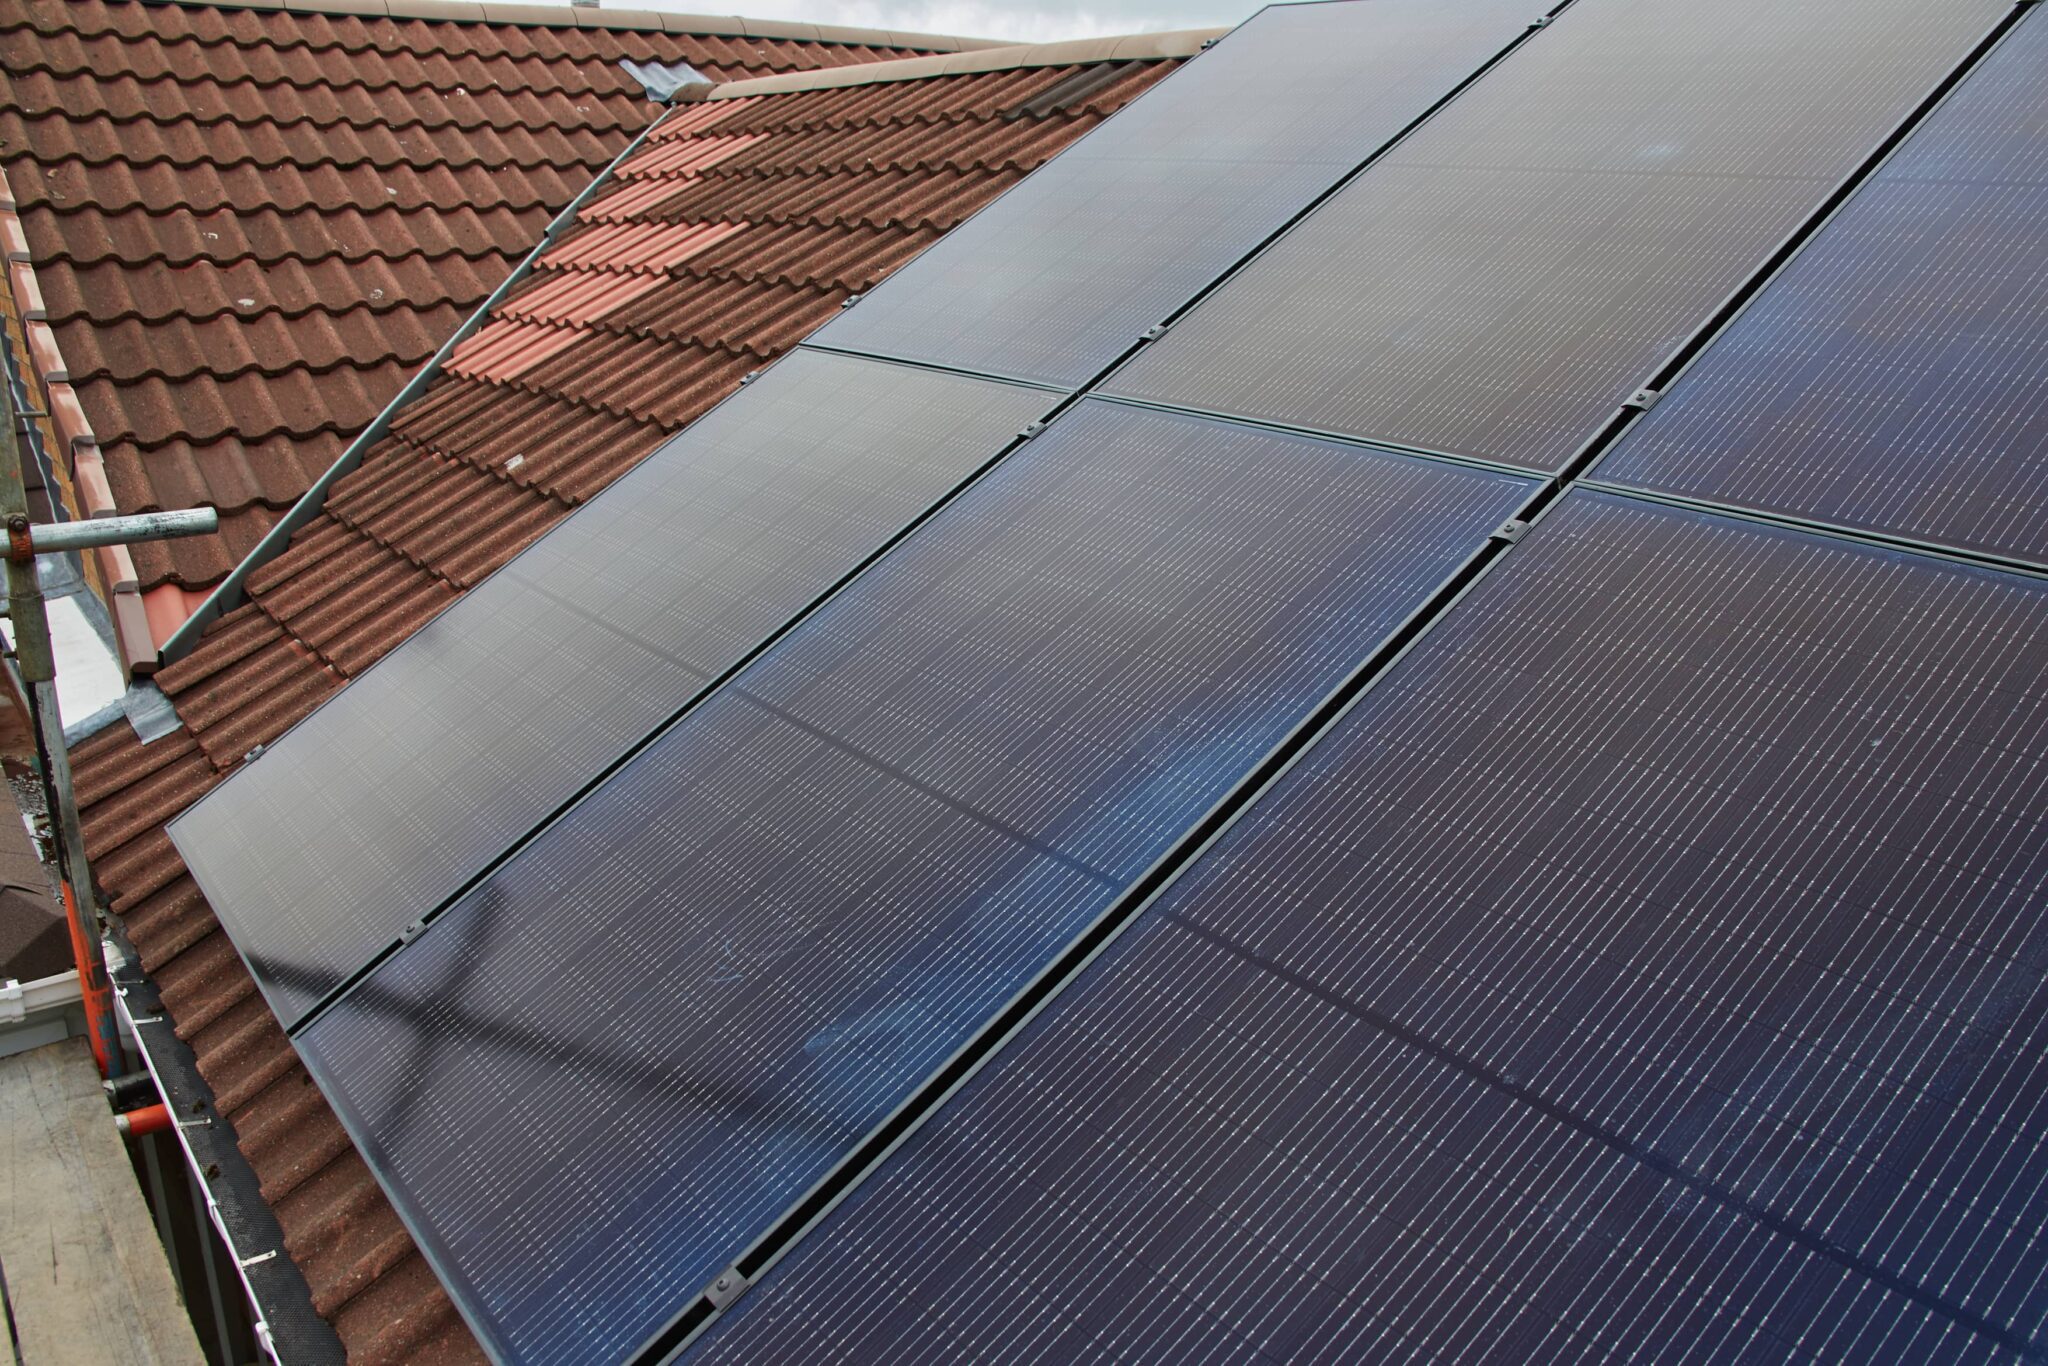 Solar panels mounted on the roof of a home next to traditional terracotta tiles.